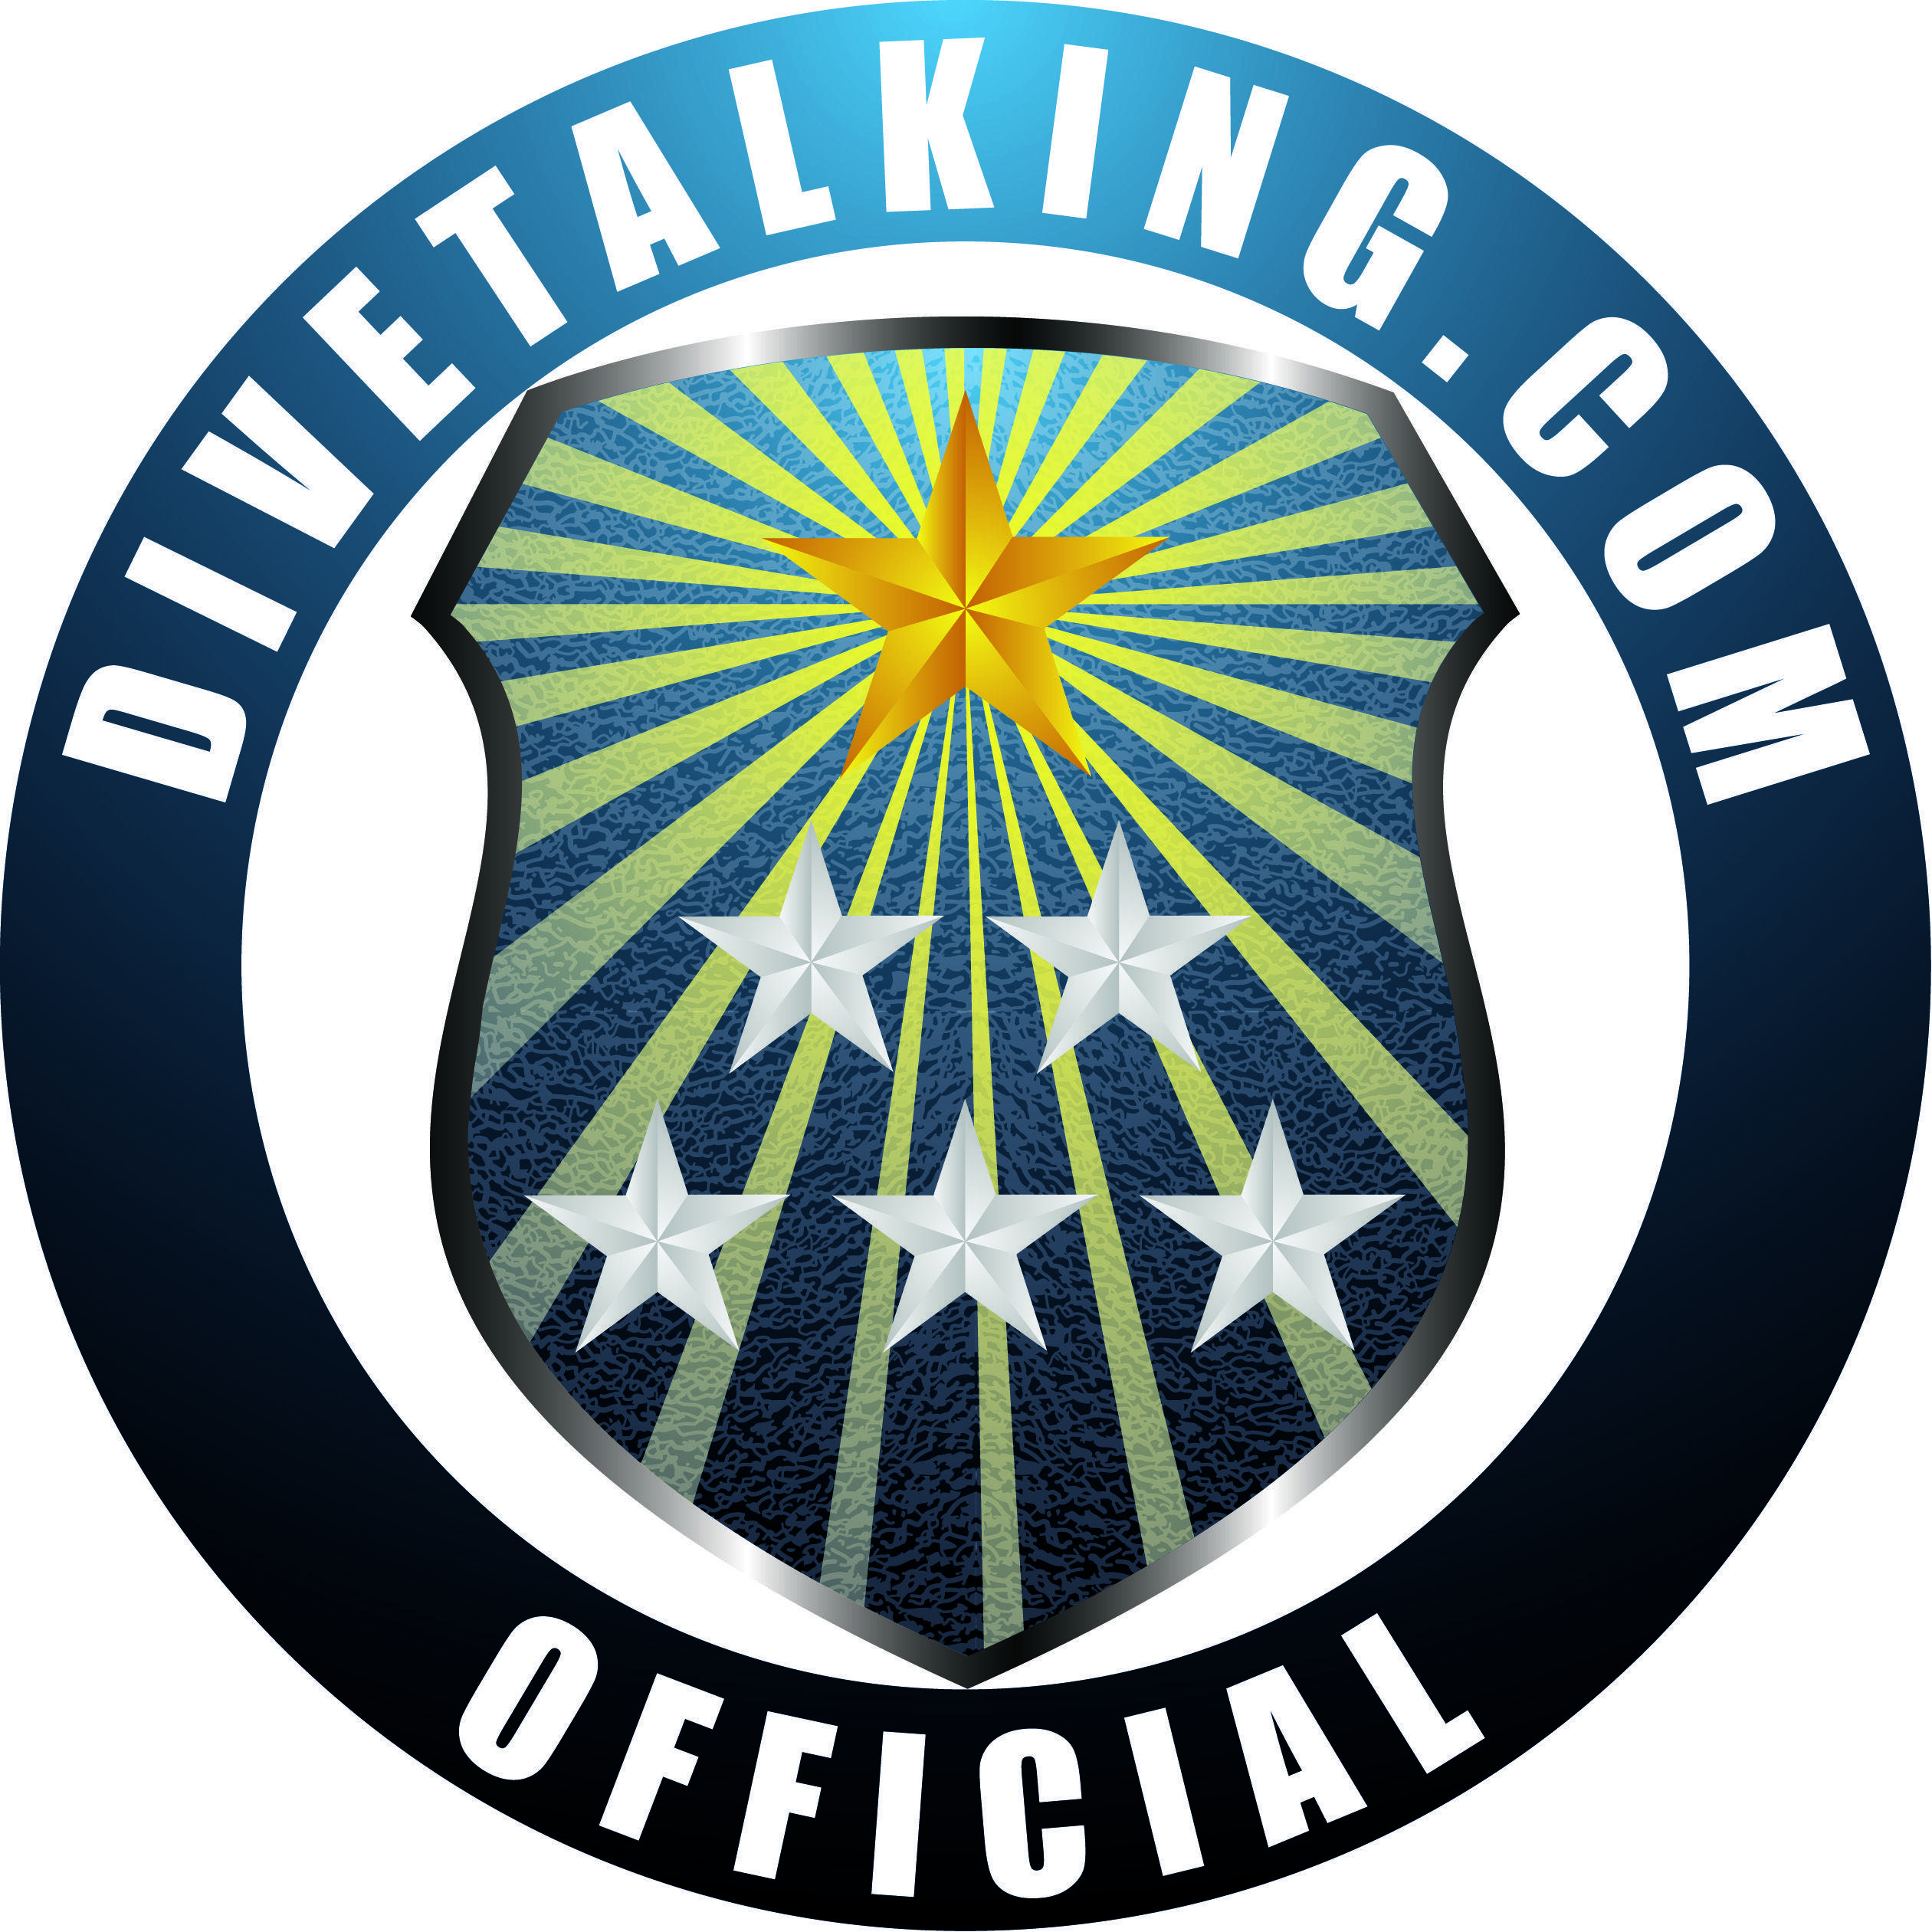 Official Logo - Show your support by displaying Divetalkings official logo